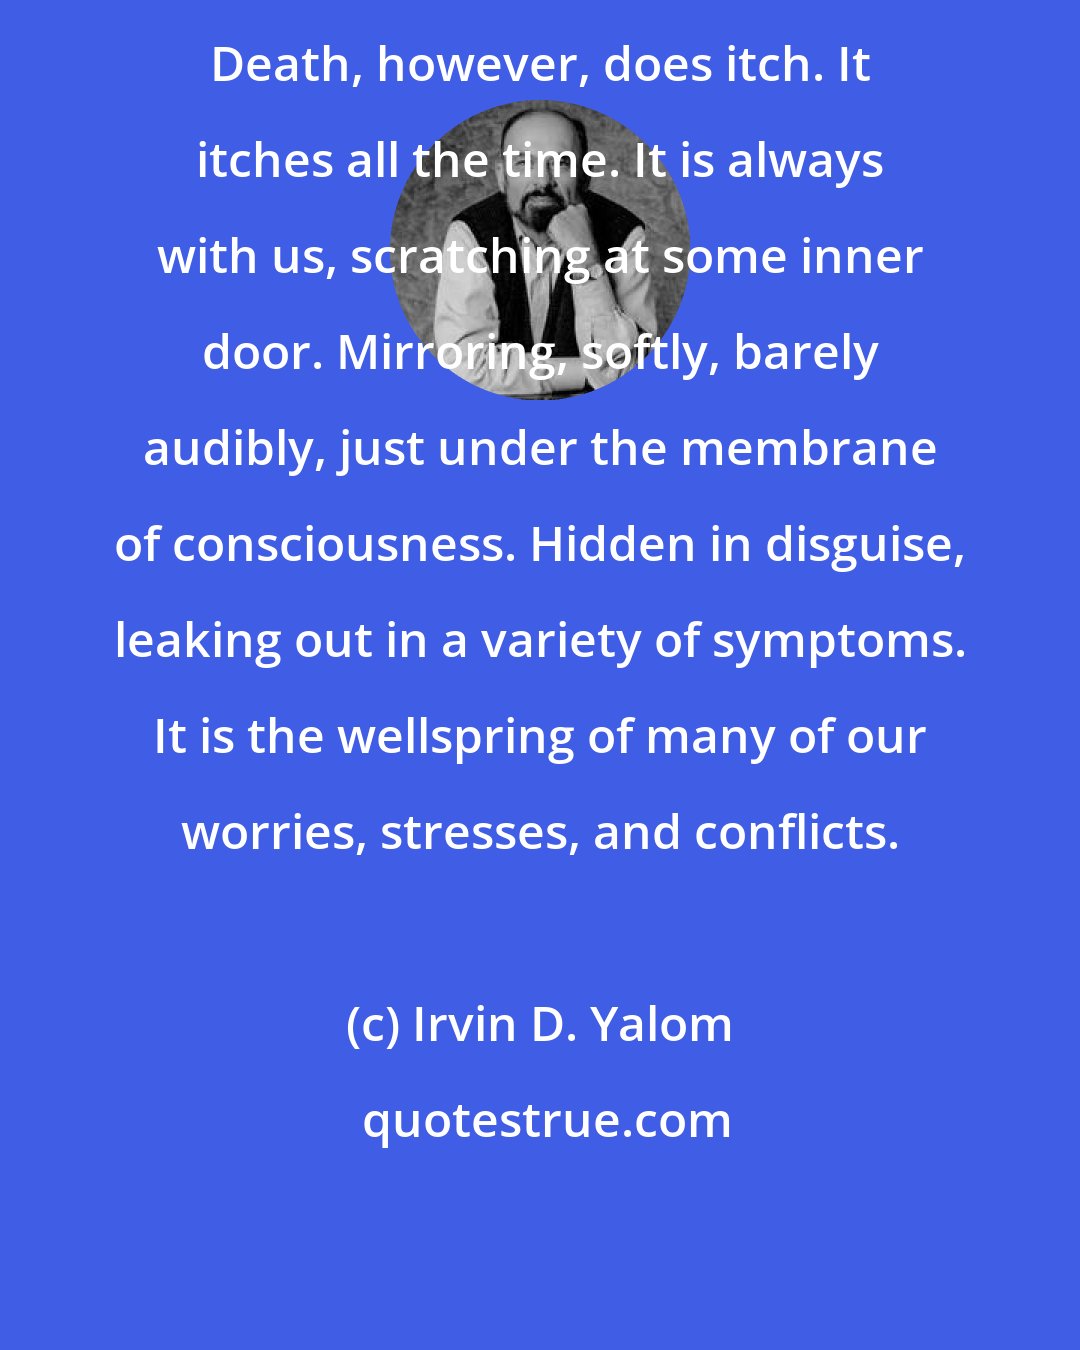 Irvin D. Yalom: Death, however, does itch. It itches all the time. It is always with us, scratching at some inner door. Mirroring, softly, barely audibly, just under the membrane of consciousness. Hidden in disguise, leaking out in a variety of symptoms. It is the wellspring of many of our worries, stresses, and conflicts.